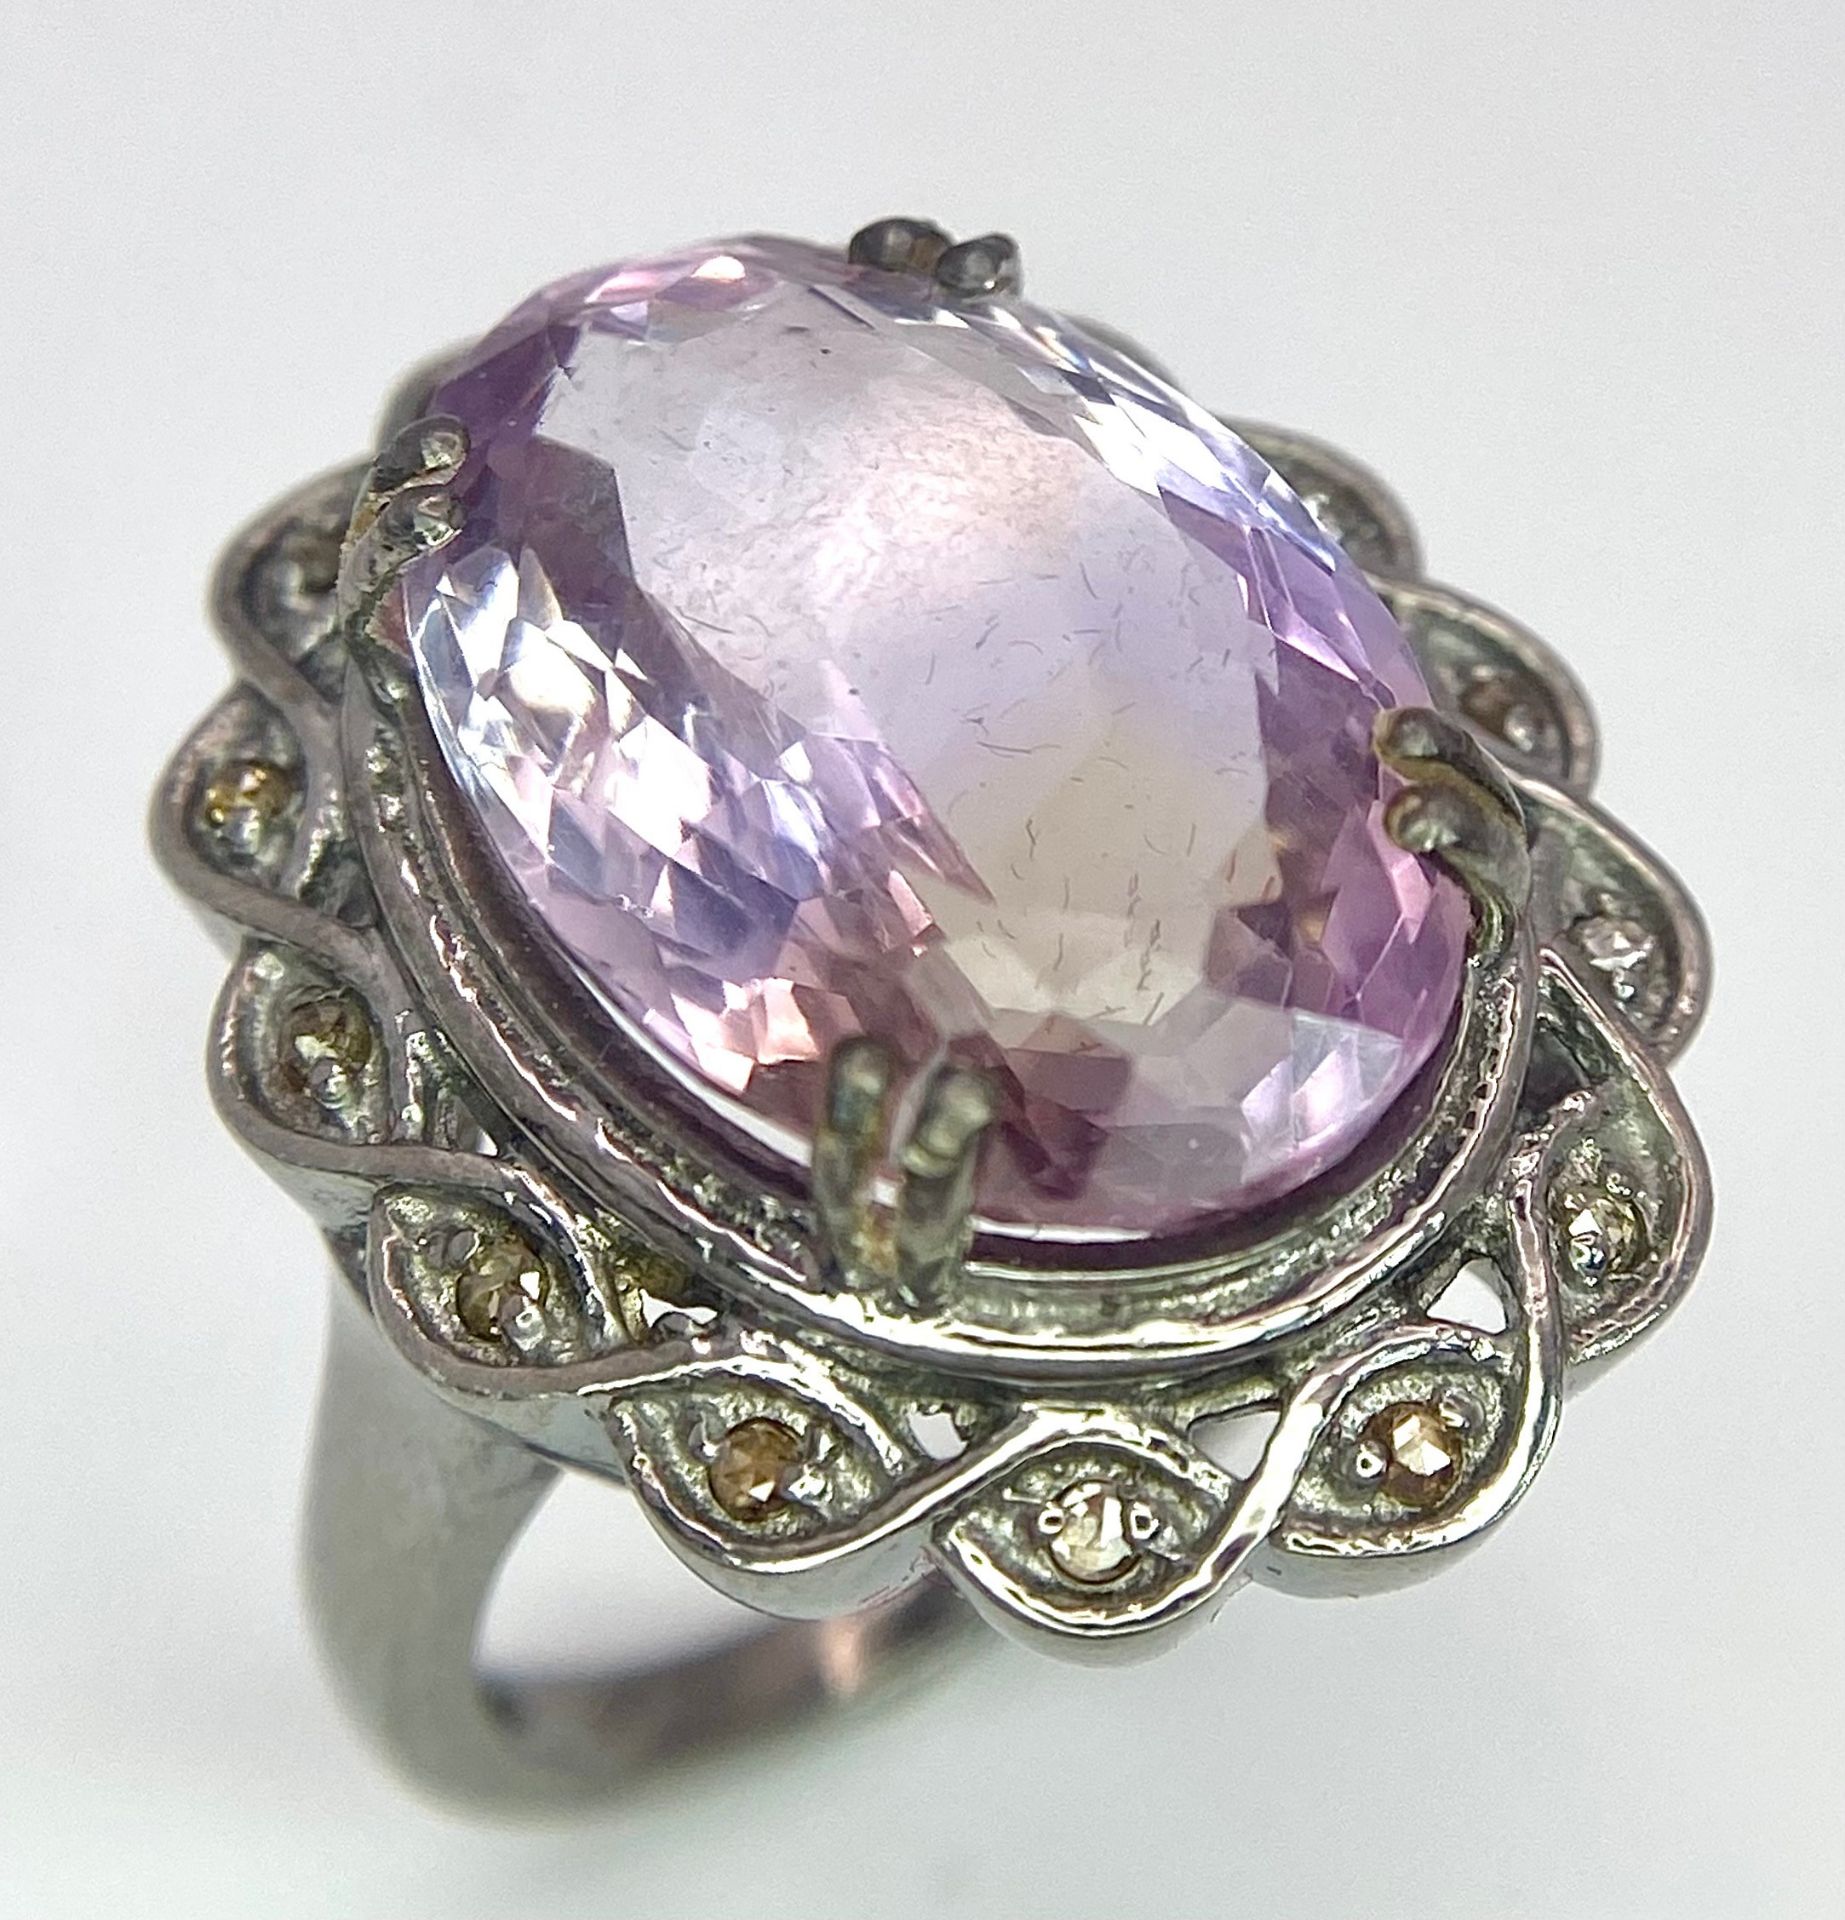 An 11.65ct Amethyst Ring with 0.25ctw of Diamond Accents. Set in 925 Silver. Size N. 9.4g total